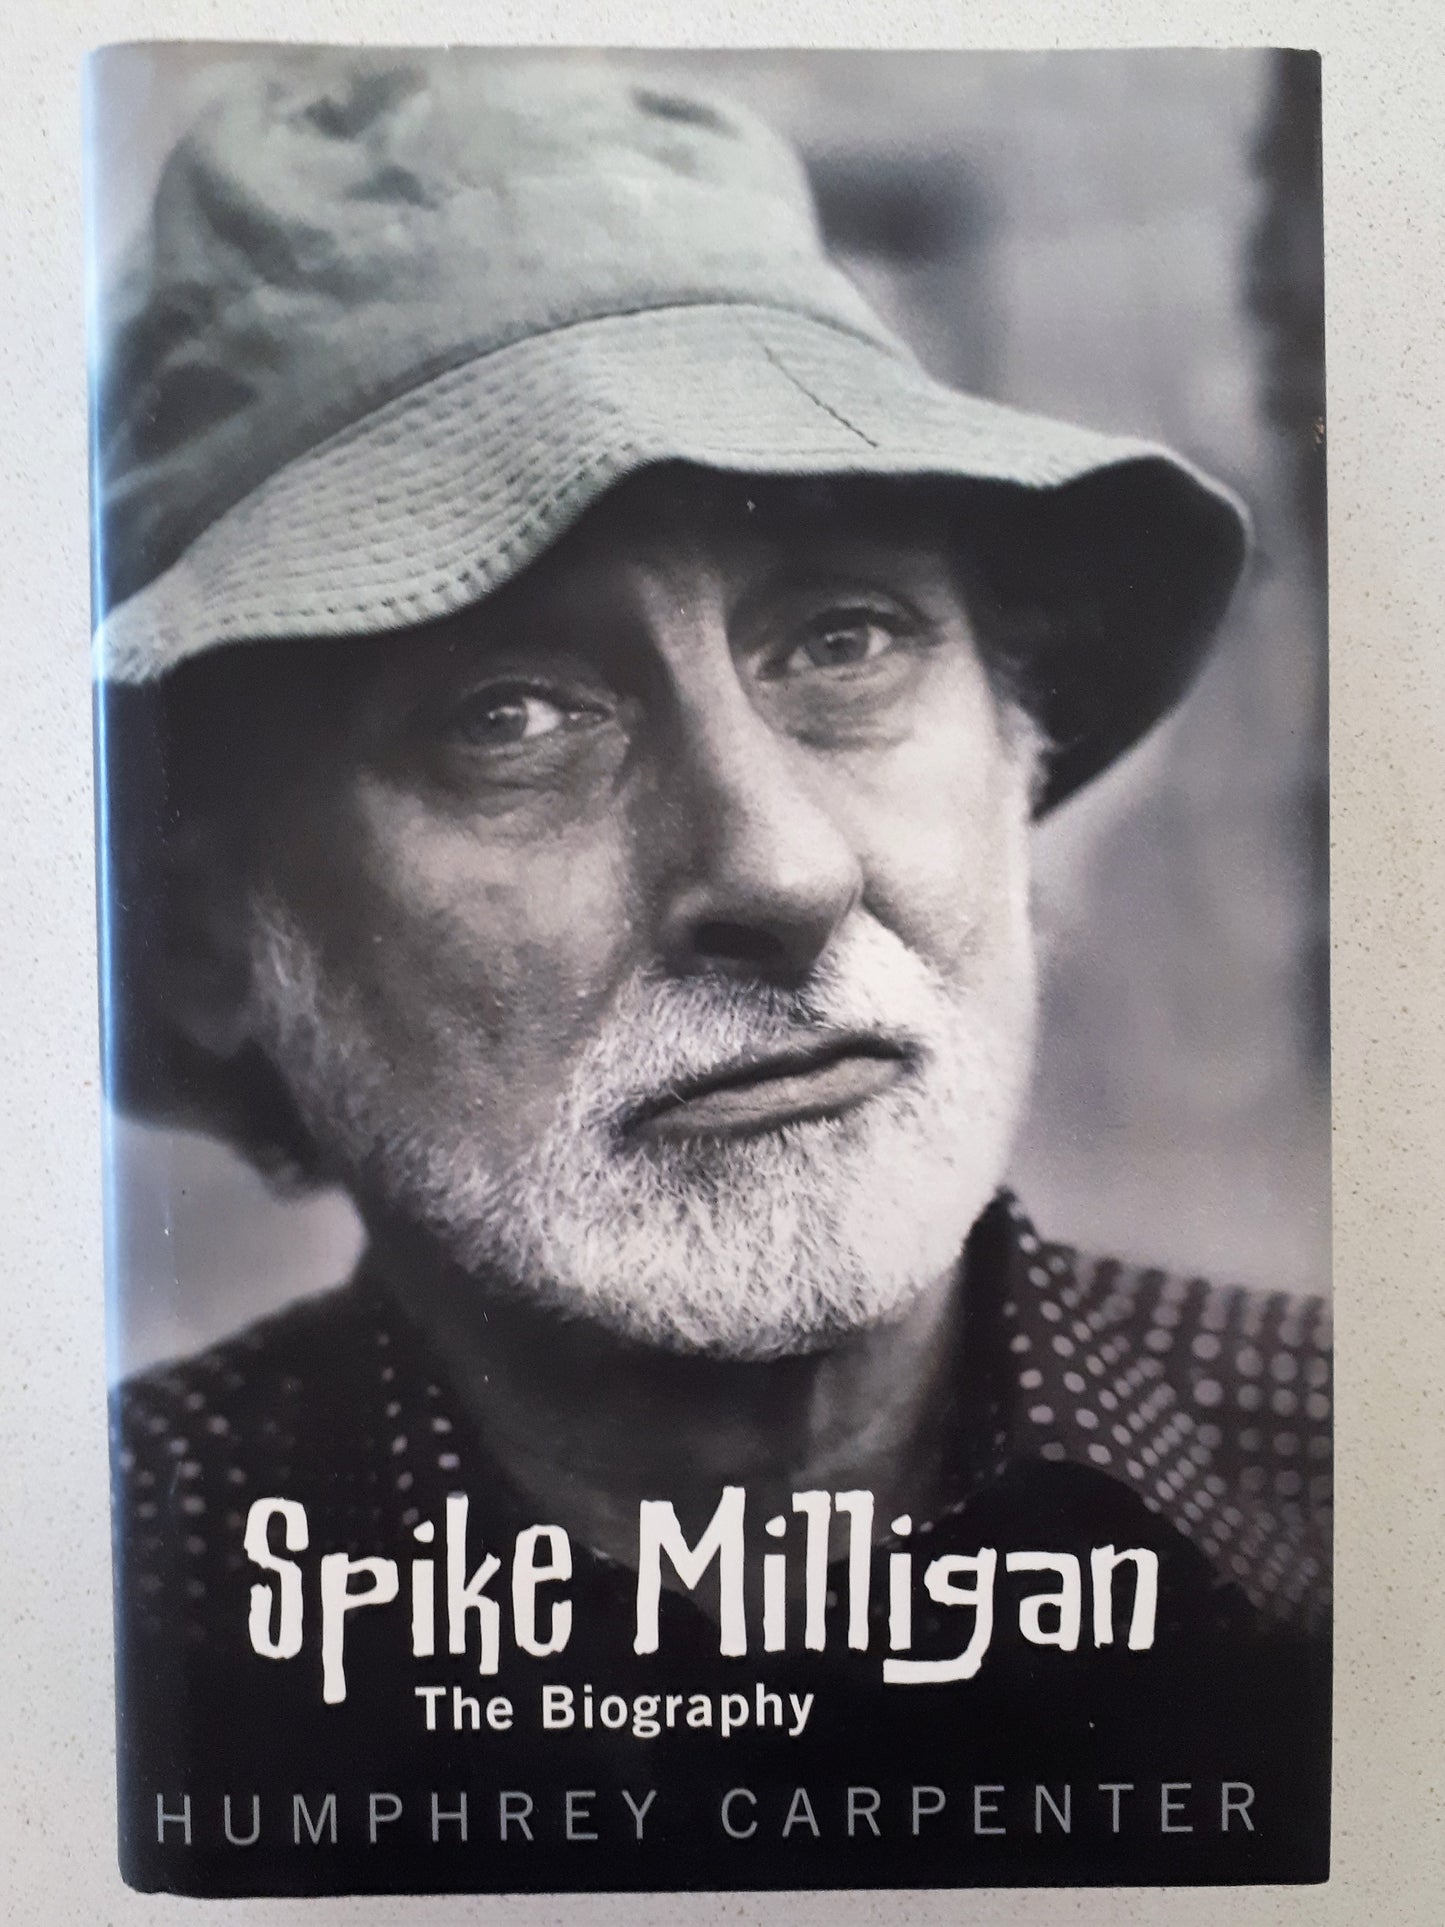 Spike Milligan The Biography by Humphrey Carpenter